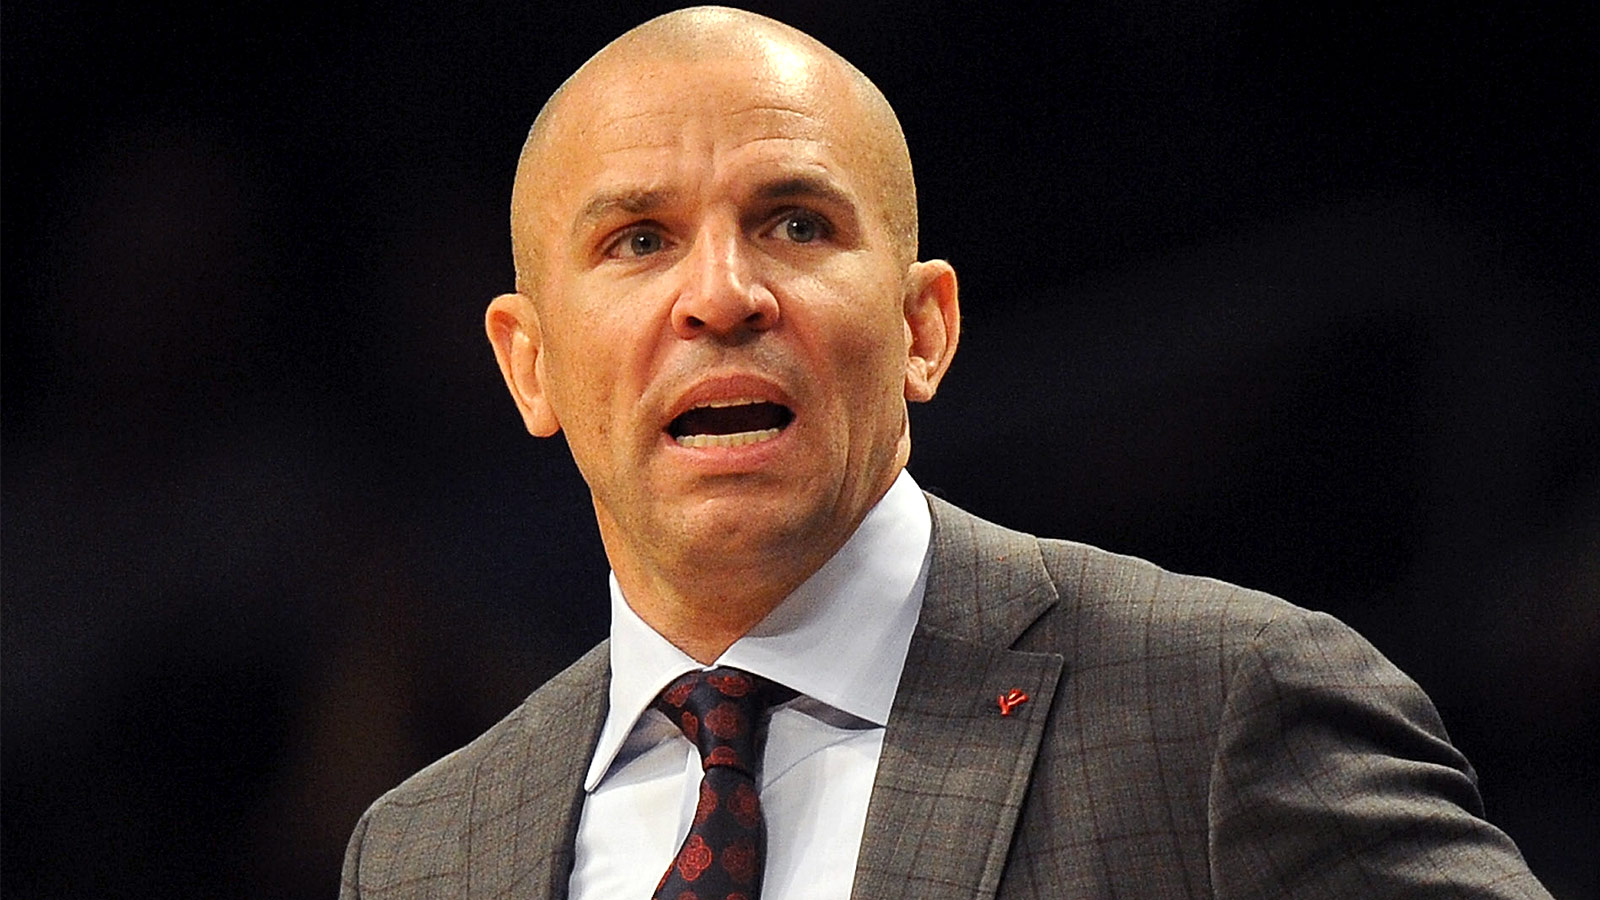 Jason Kidd: Being True To His Narcissistic Self - Psychology of Sports and More